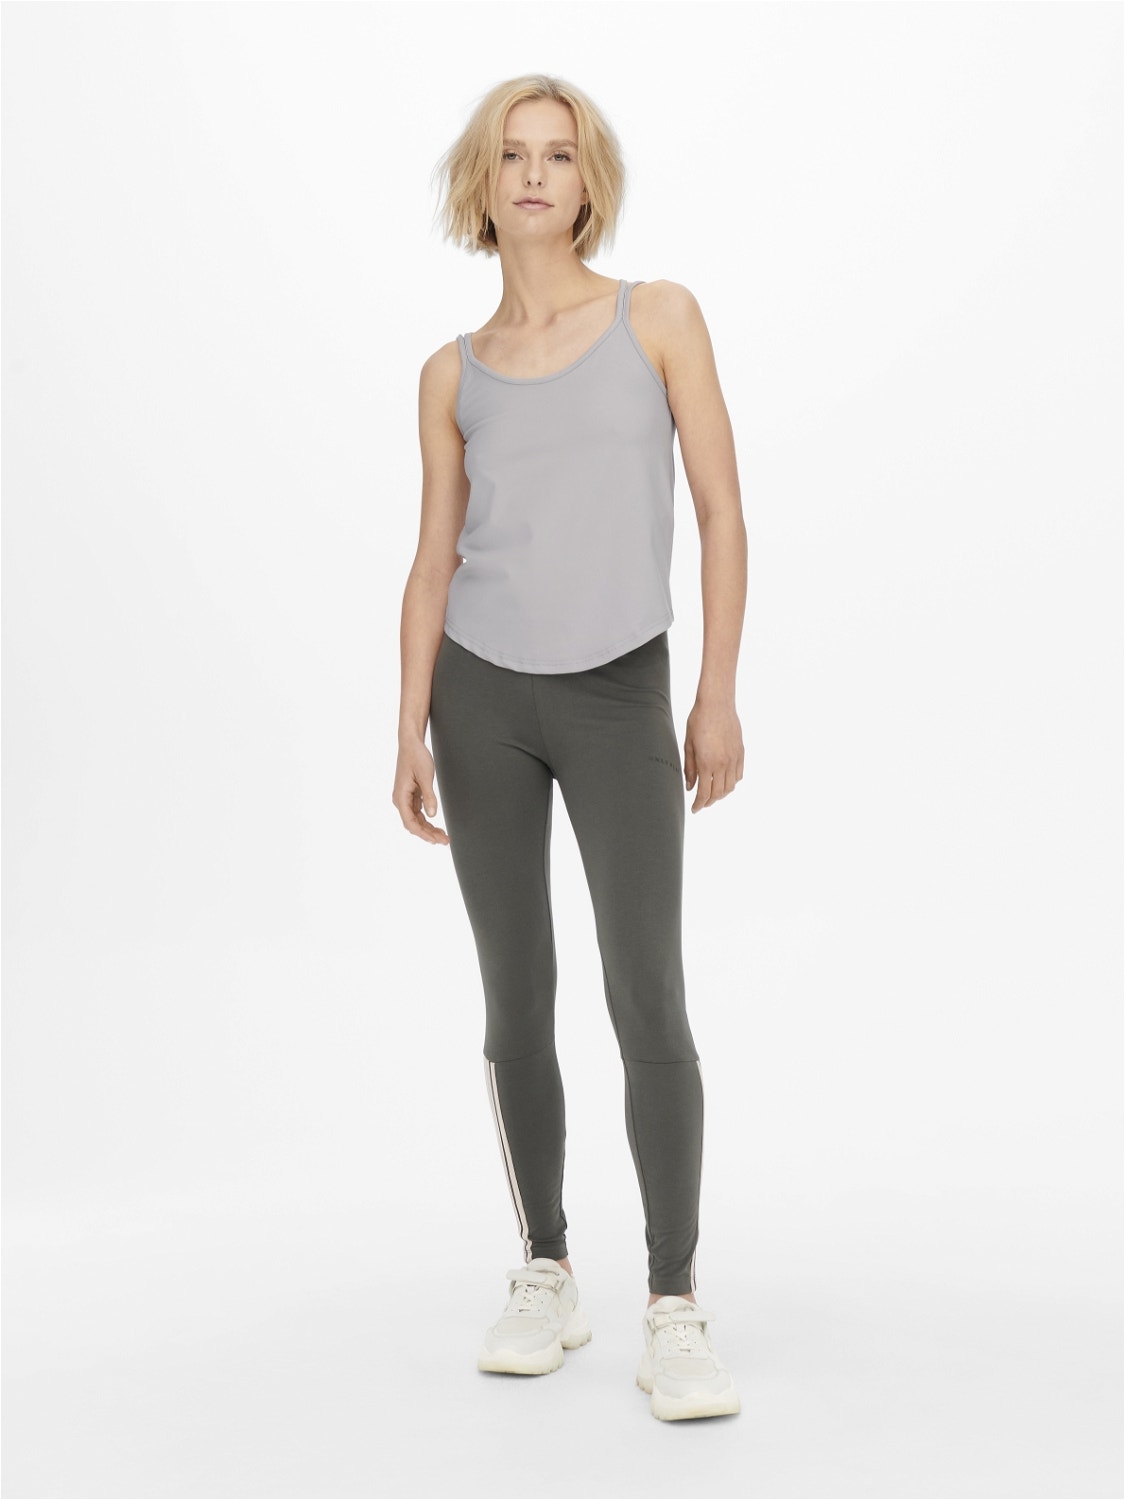 ONLY Sans manches Top sport -Gull Gray - 15244262